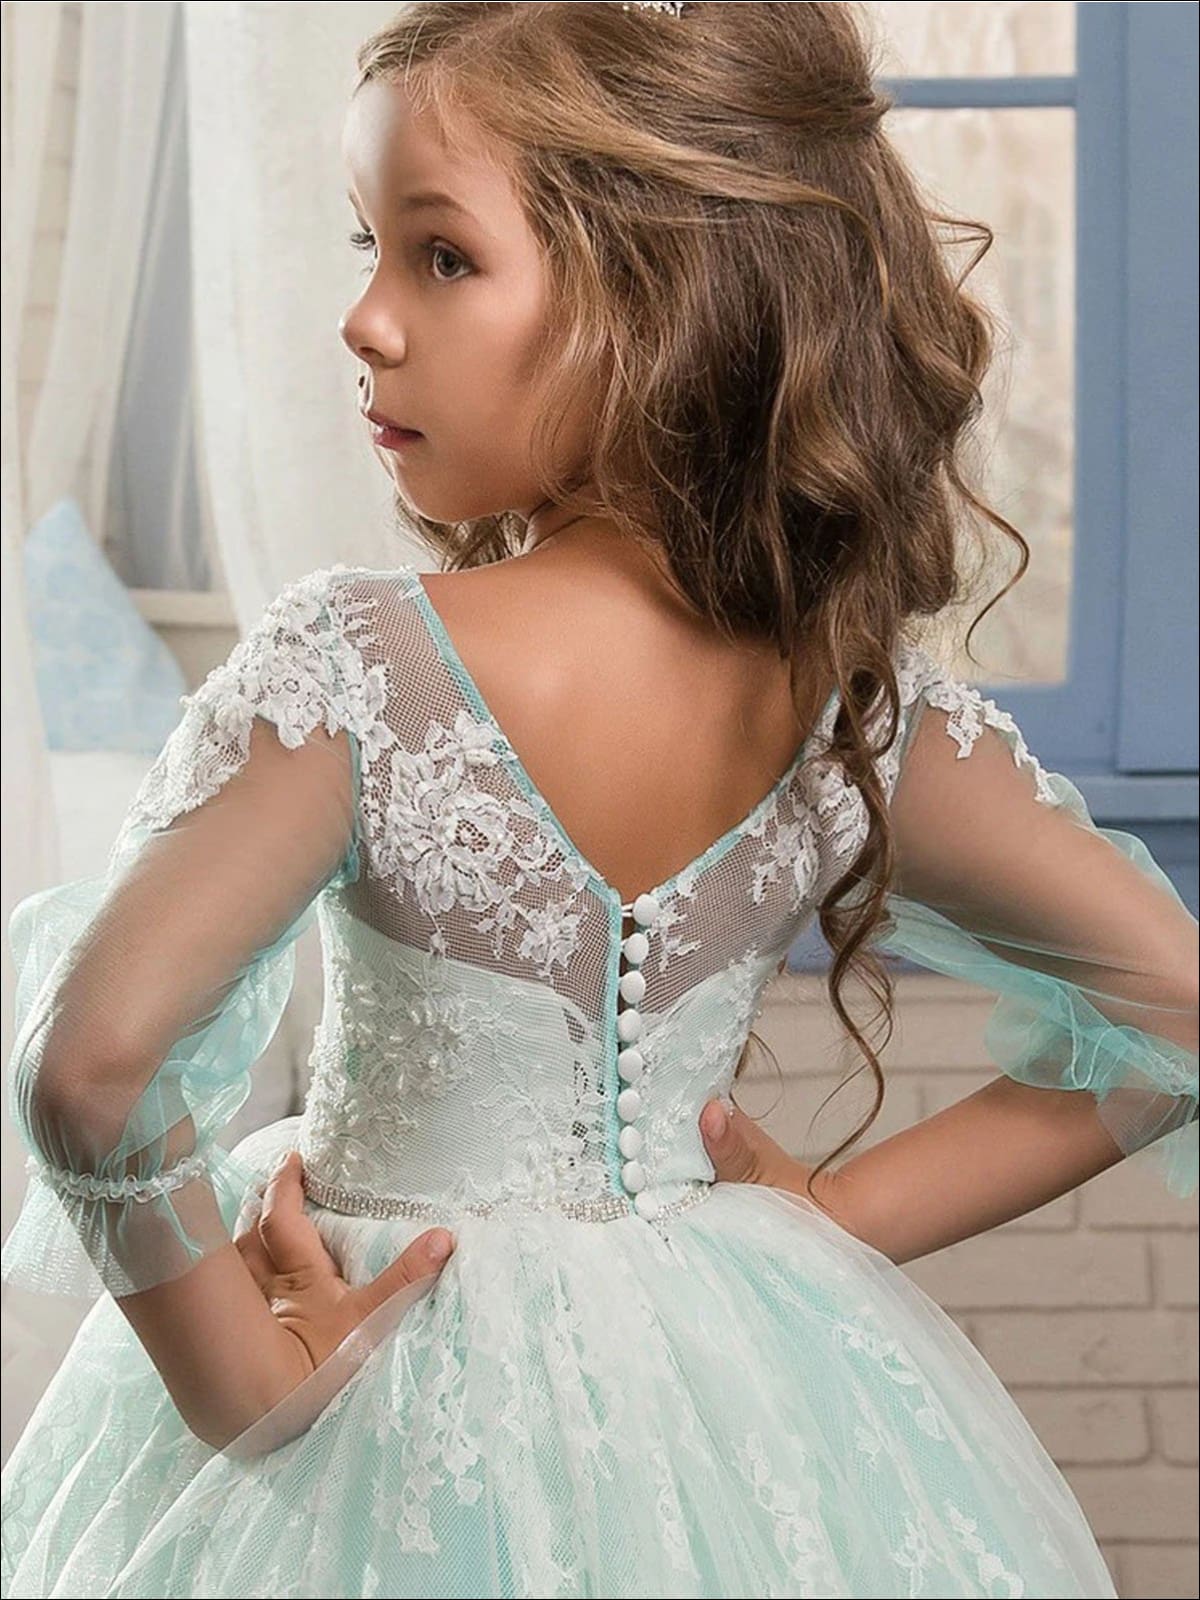 Girls Special Occasion Dress | Lace Embellished Communion Gown